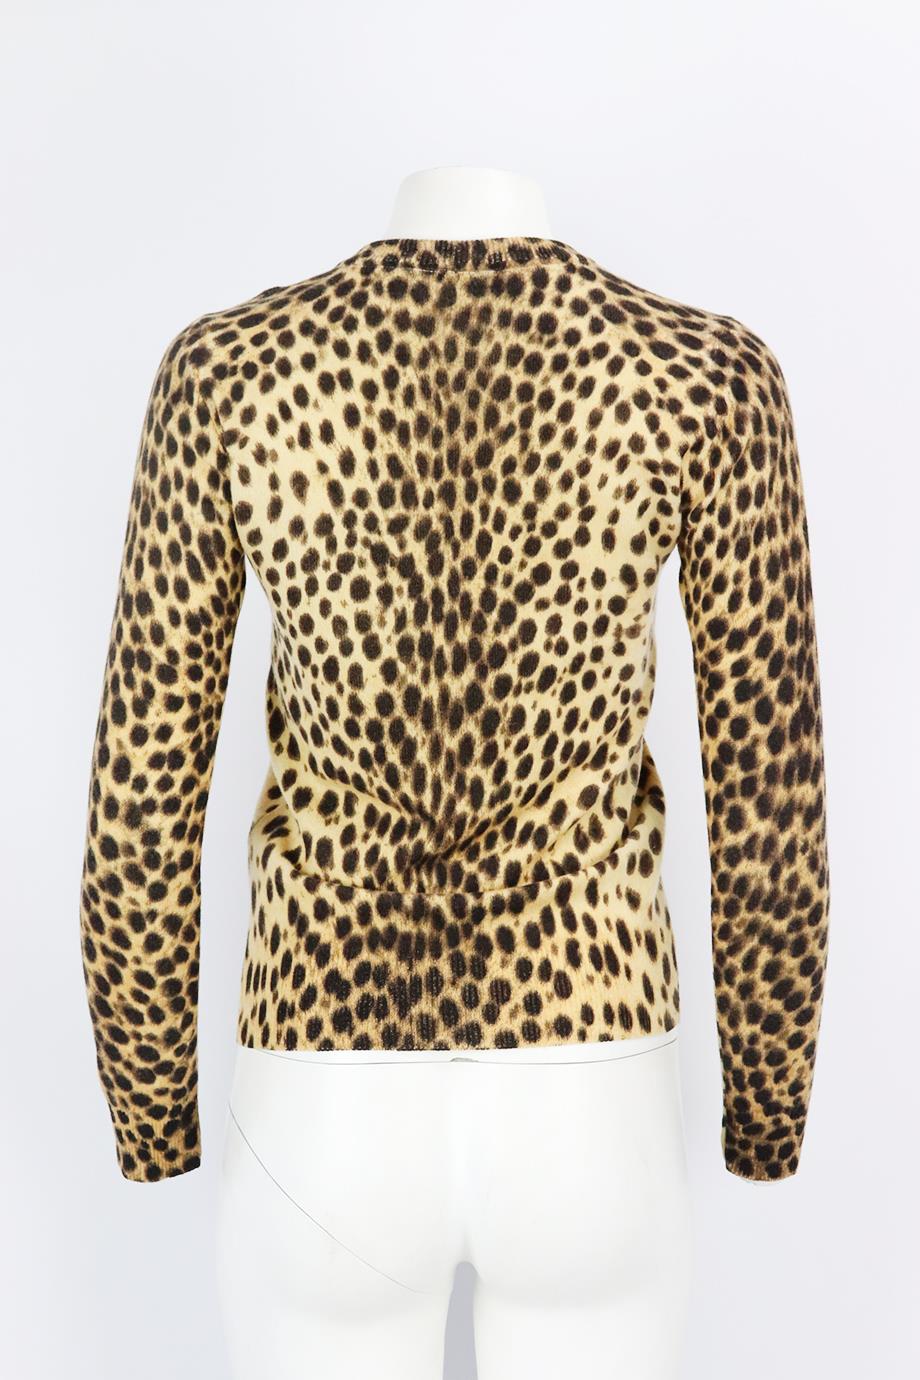 DOLCE AND GABBANA LEOPARD JACQUARD WOOL TOP AND CARDIGAN SET IT 38 UK 6